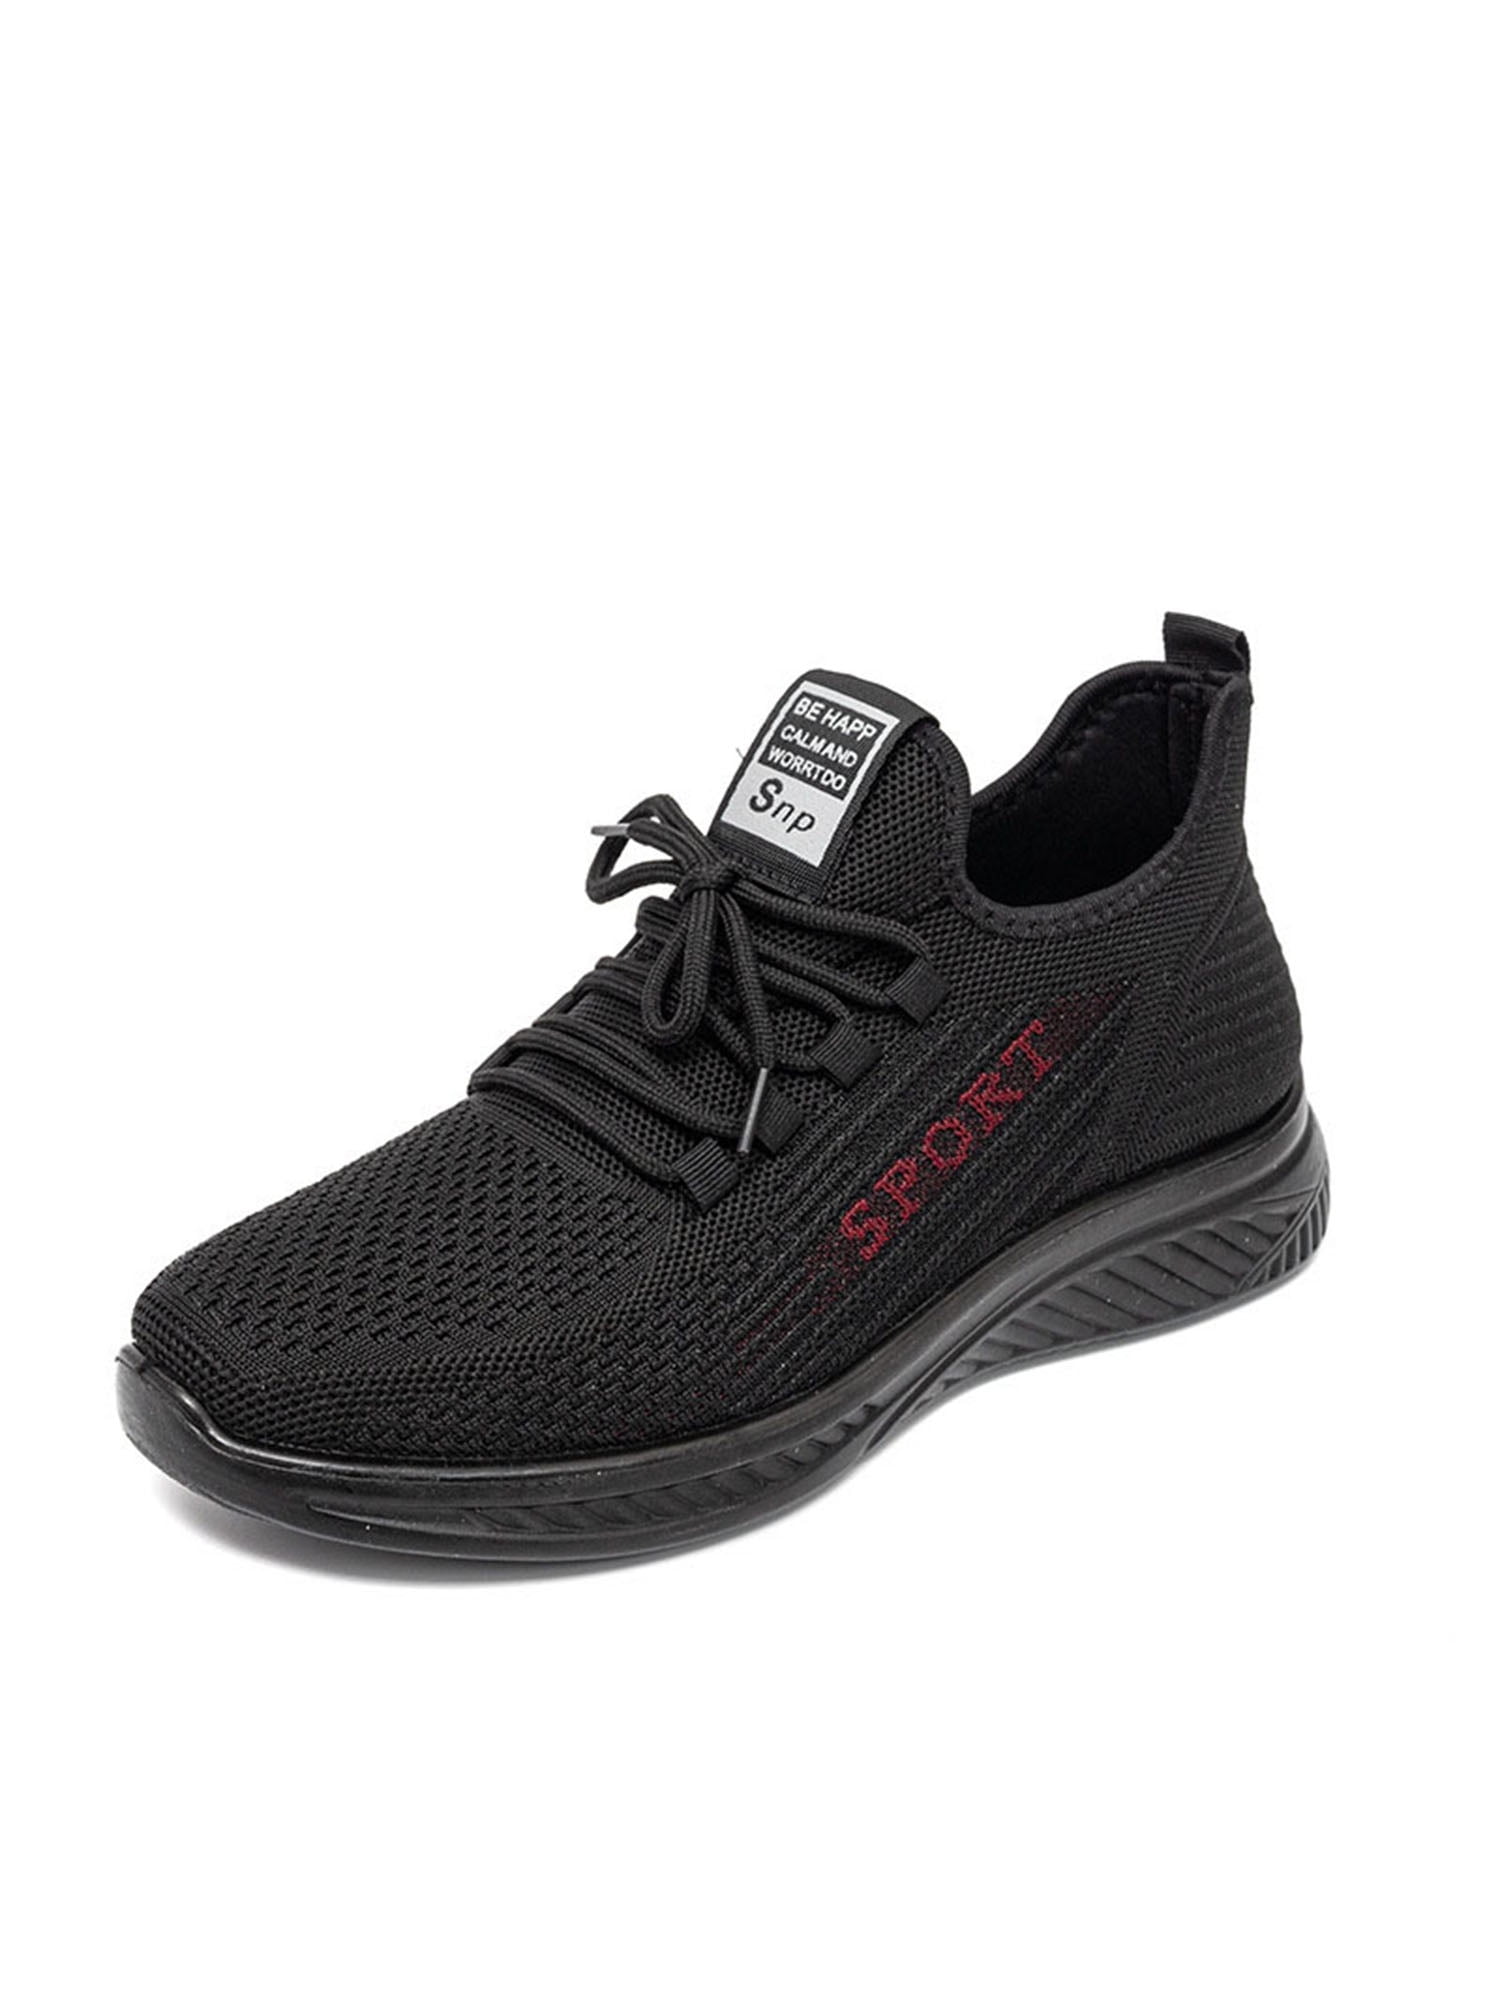 Details about   Running Shoes Air Mesh Athletic Sneakers Men‘s Fashion Sock Trainers Breathable 